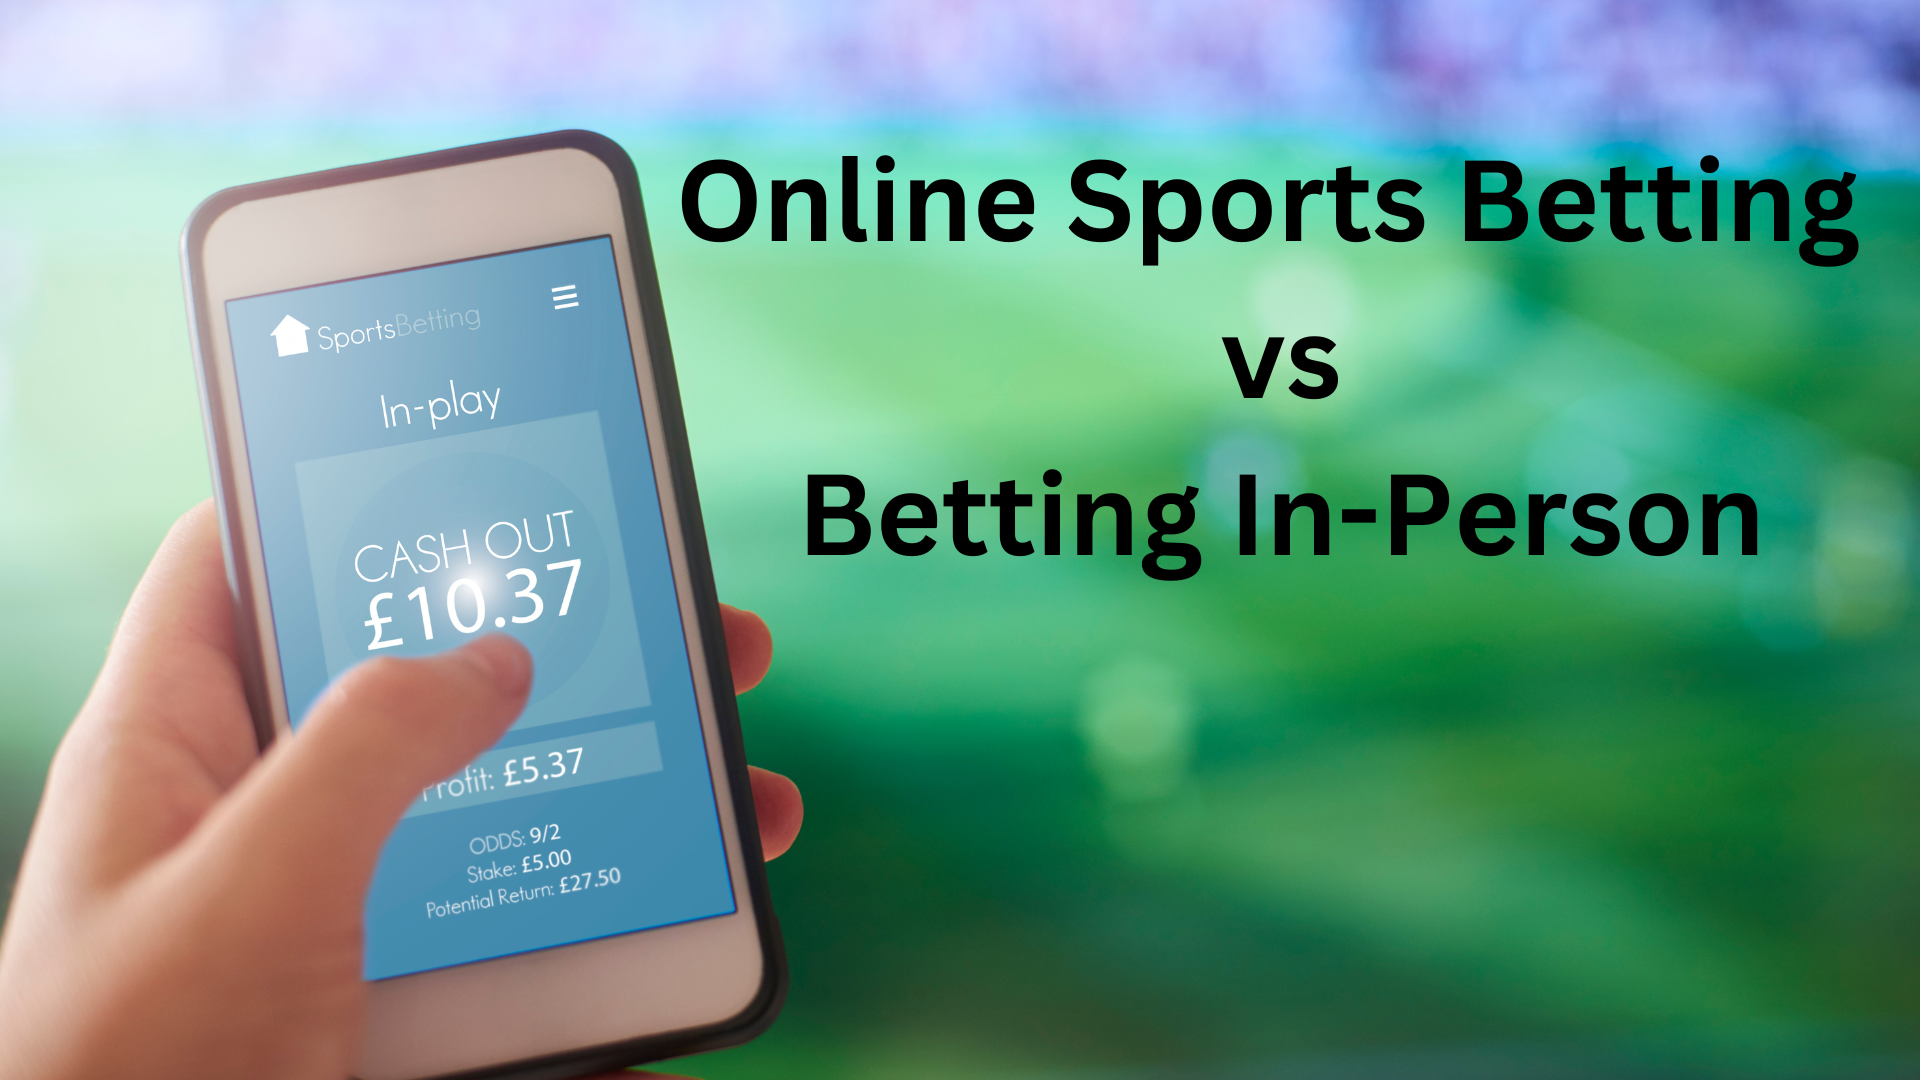 Online Sports Betting vs. Betting In-Person